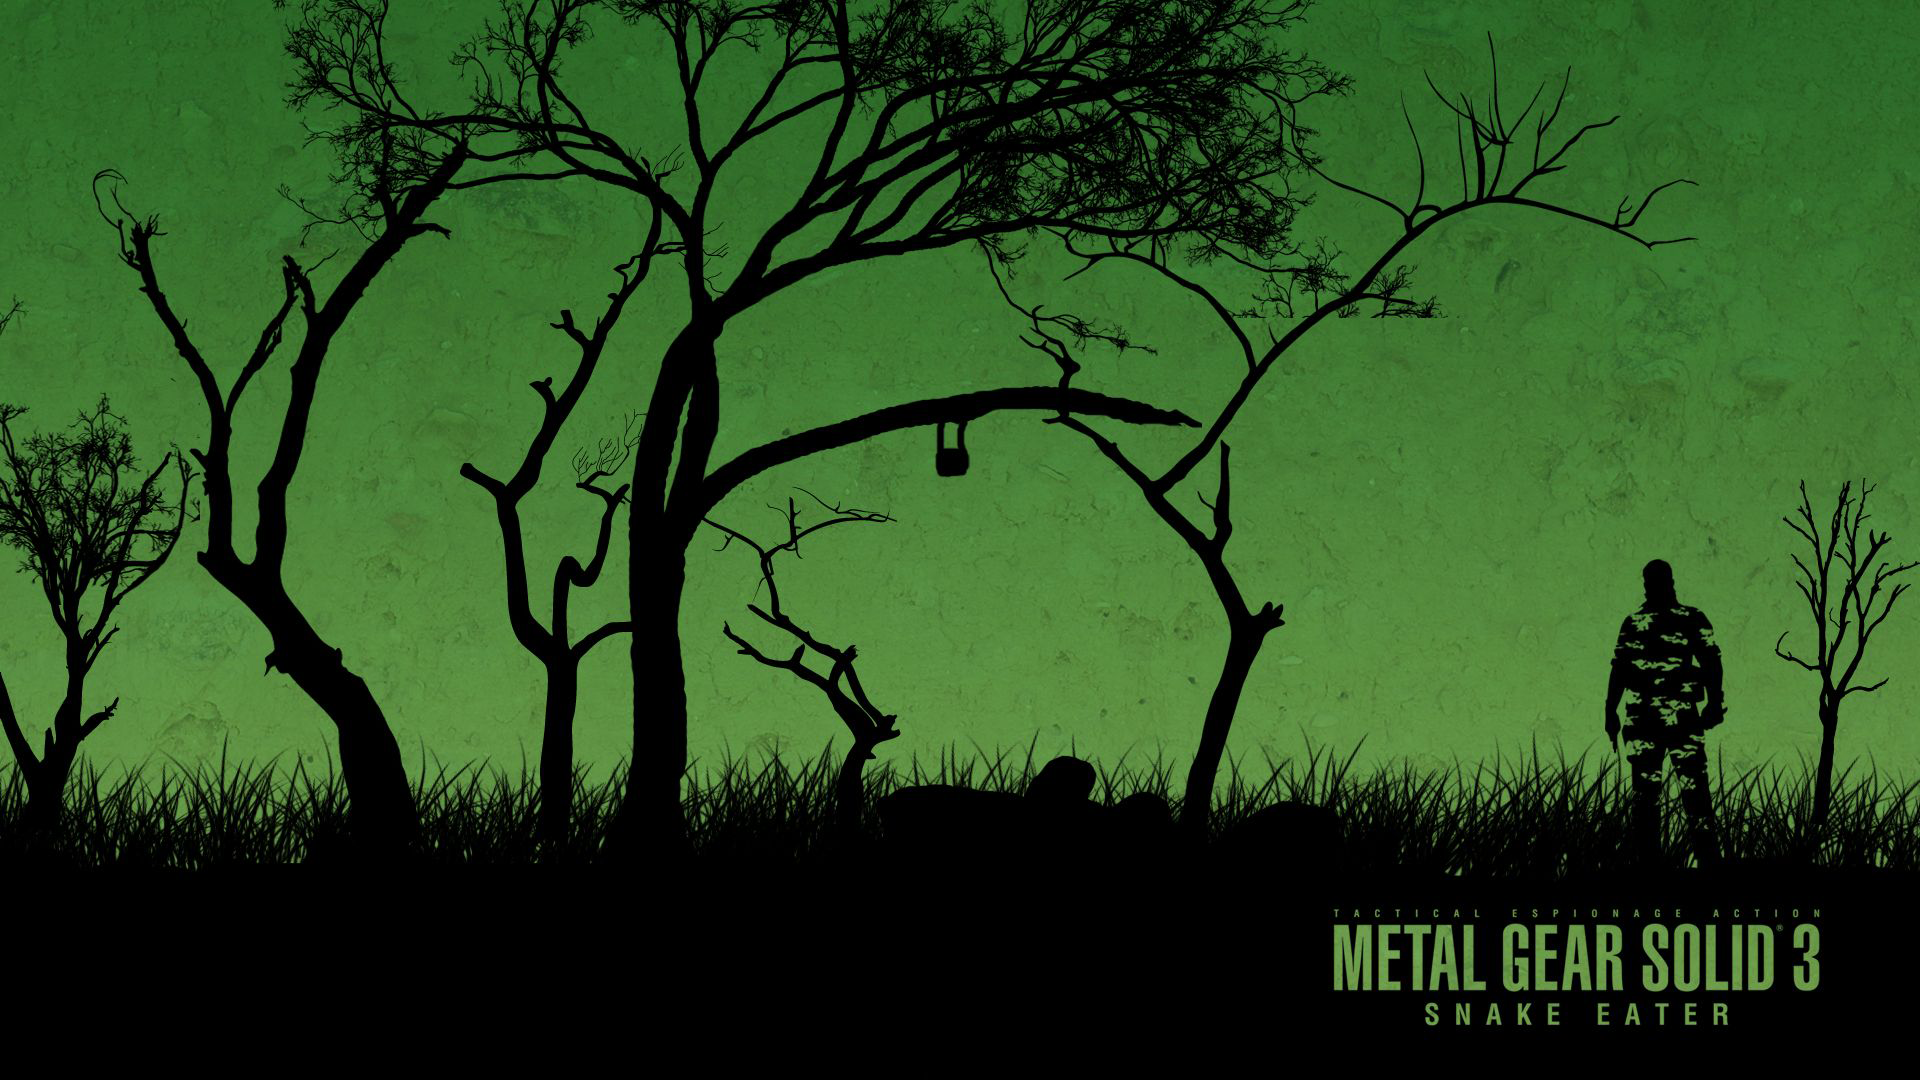 Metal Gear Solid 3: Snake Eater Backgrounds, Compatible - PC, Mobile, Gadgets| 1920x1080 px